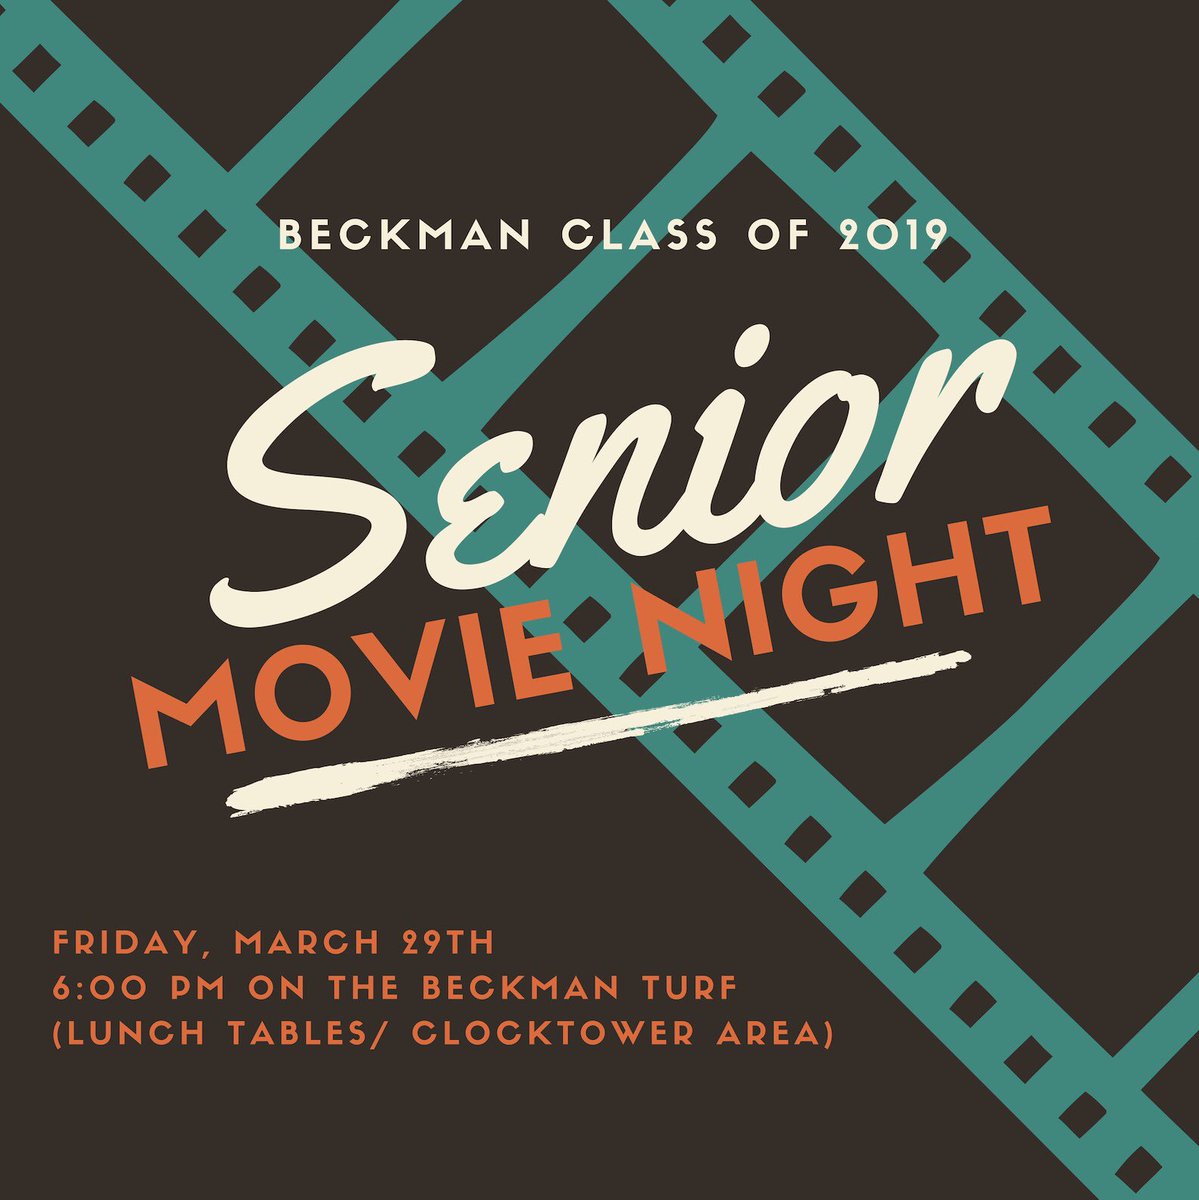 Reminder: Tonight is Senior Movie Night (6:00 PM)! Feel free to bring blankets and/or lawn chairs. Snacks will be provided. 😊 All Beckman Seniors are welcome and we hope to see you all there!!